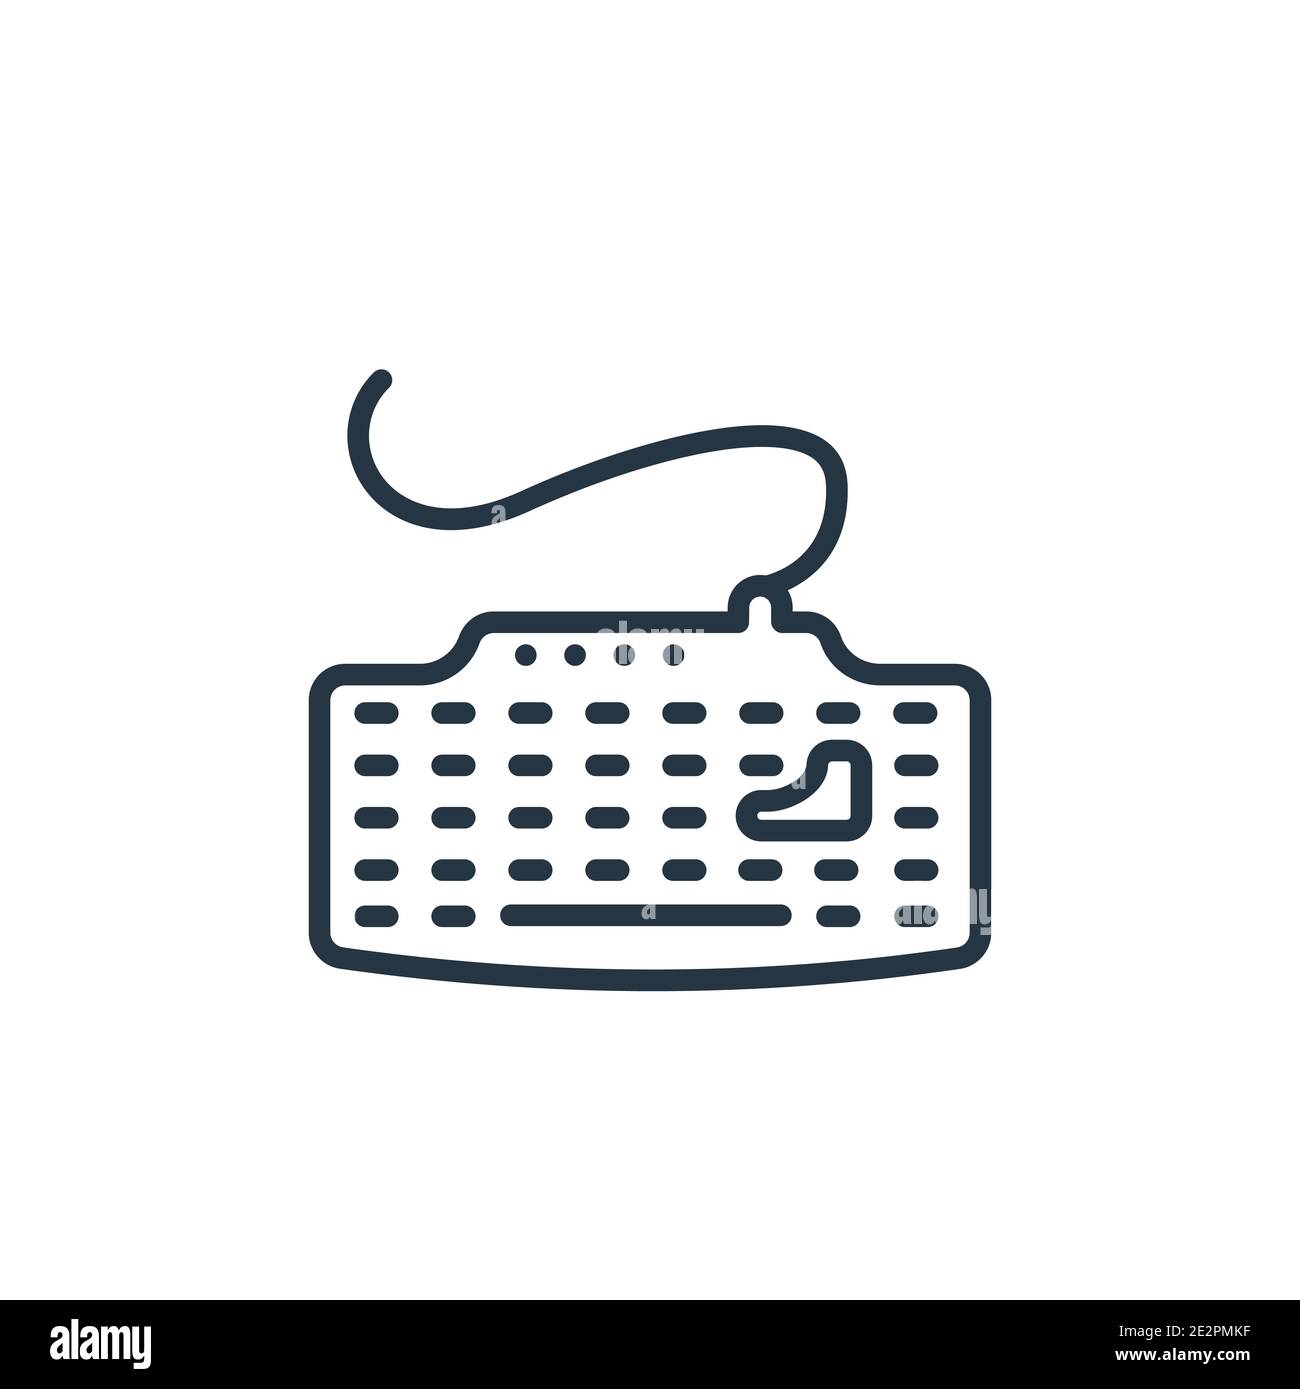 Keyboard with cable outline vector icon. Thin line black keyboard with cable icon, flat vector simple element illustration from editable computer conc Stock Vector